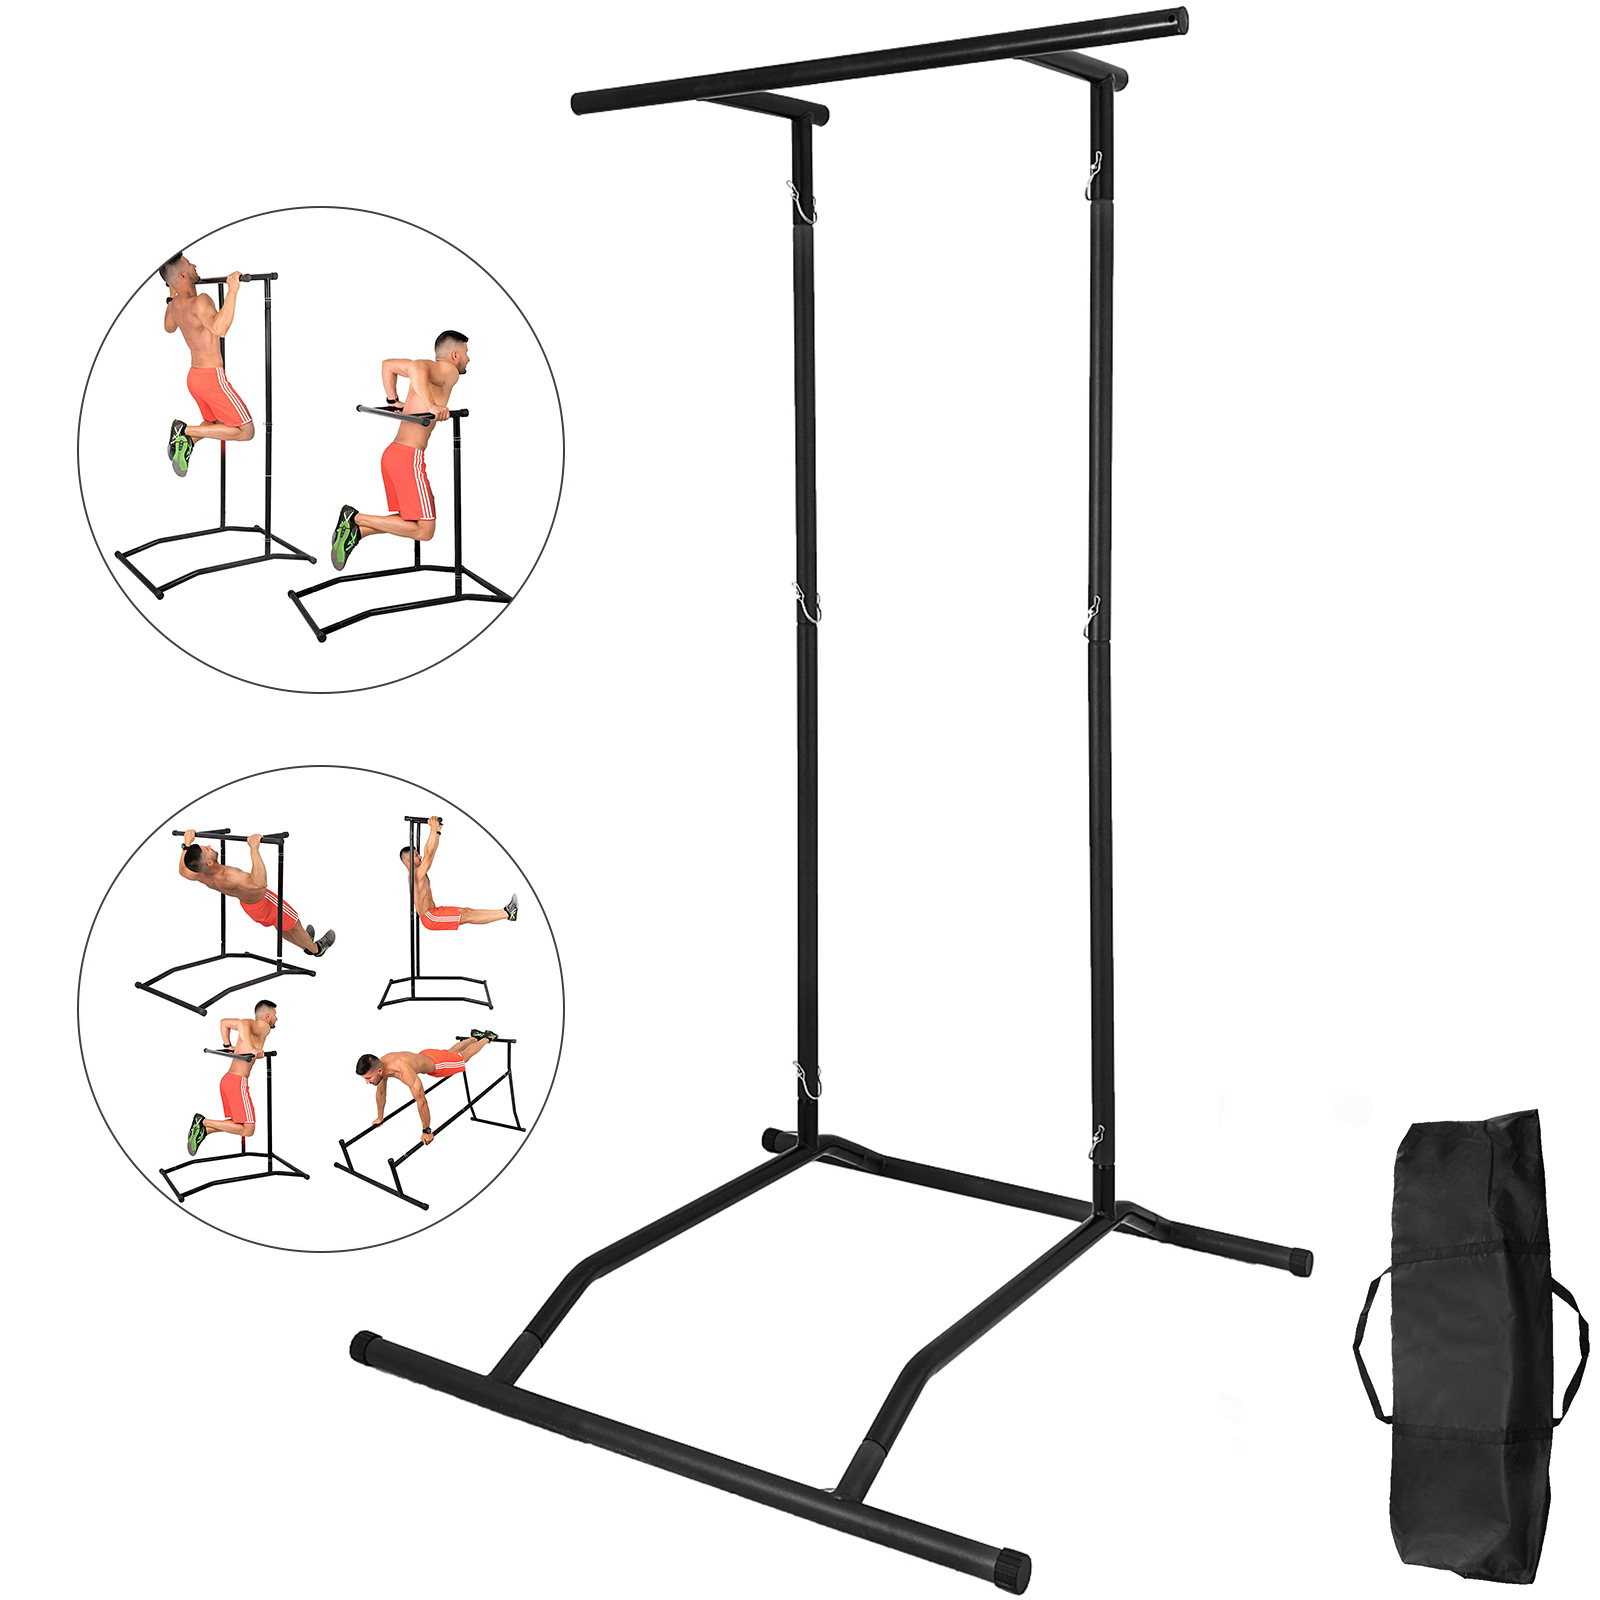 Portable Pull Up Dip Station Gym Bar Power Tower Chin Up Equipment Fitness w/Bag от Vevor Many GEOs